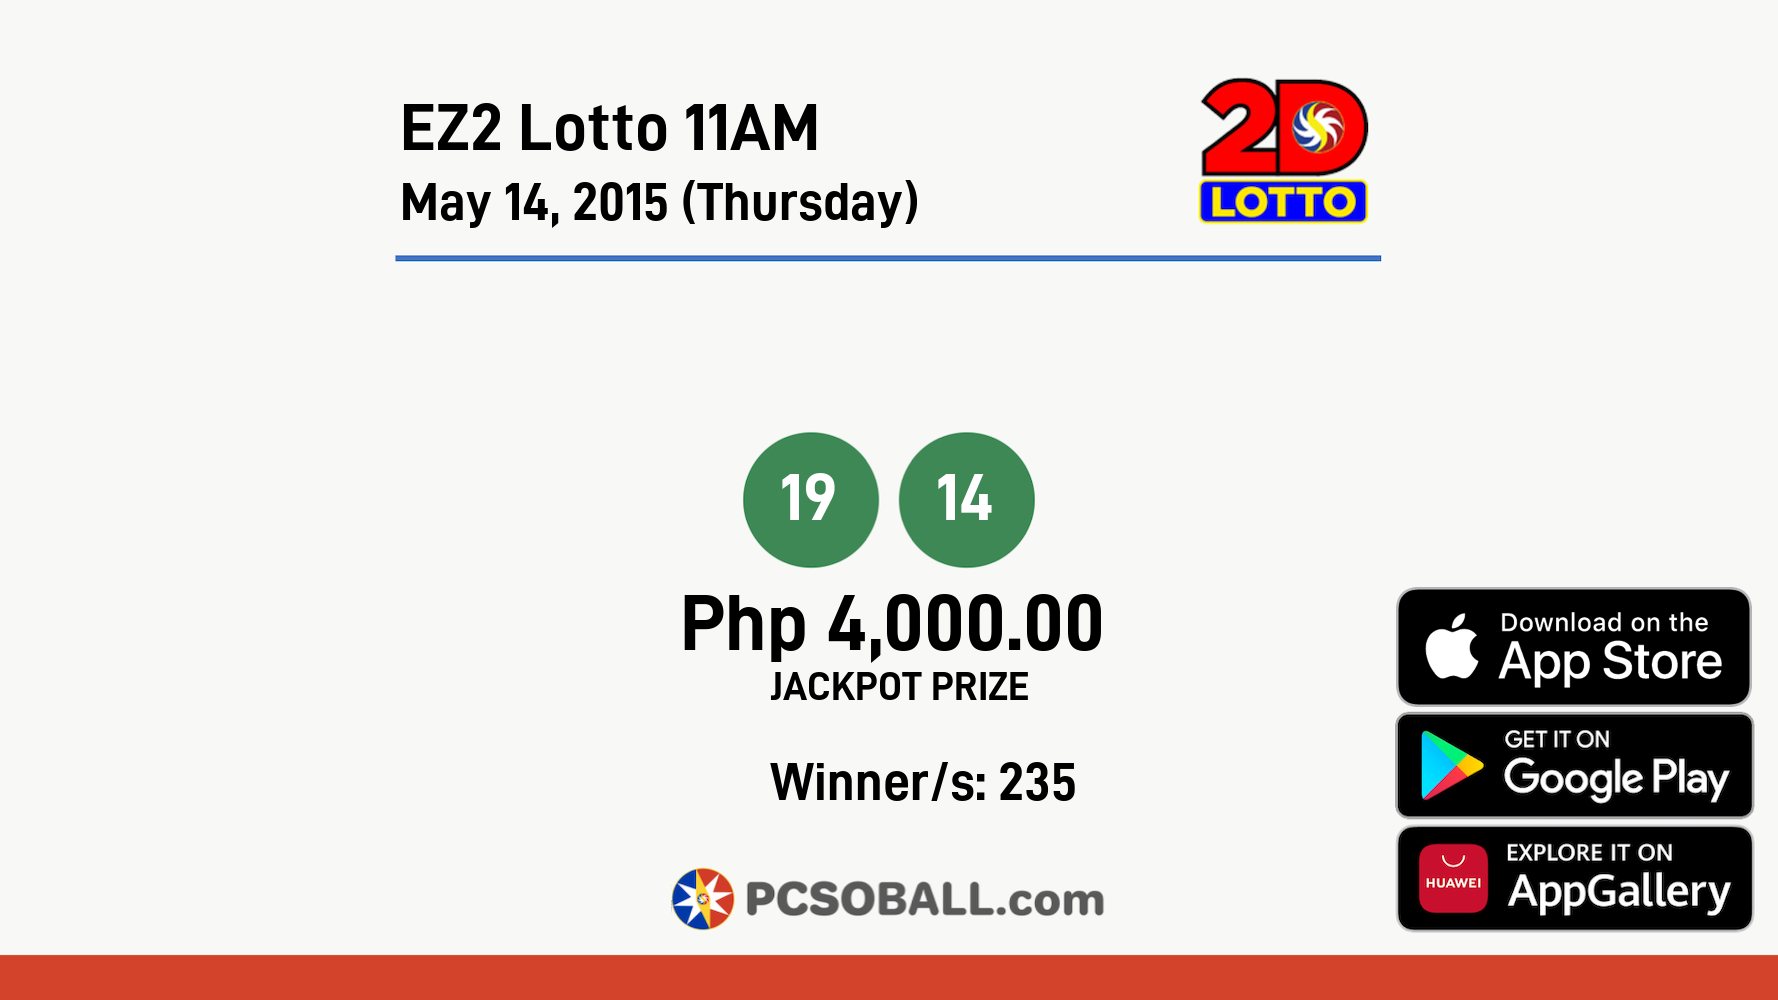 EZ2 Lotto 11AM May 14, 2015 (Thursday) Result